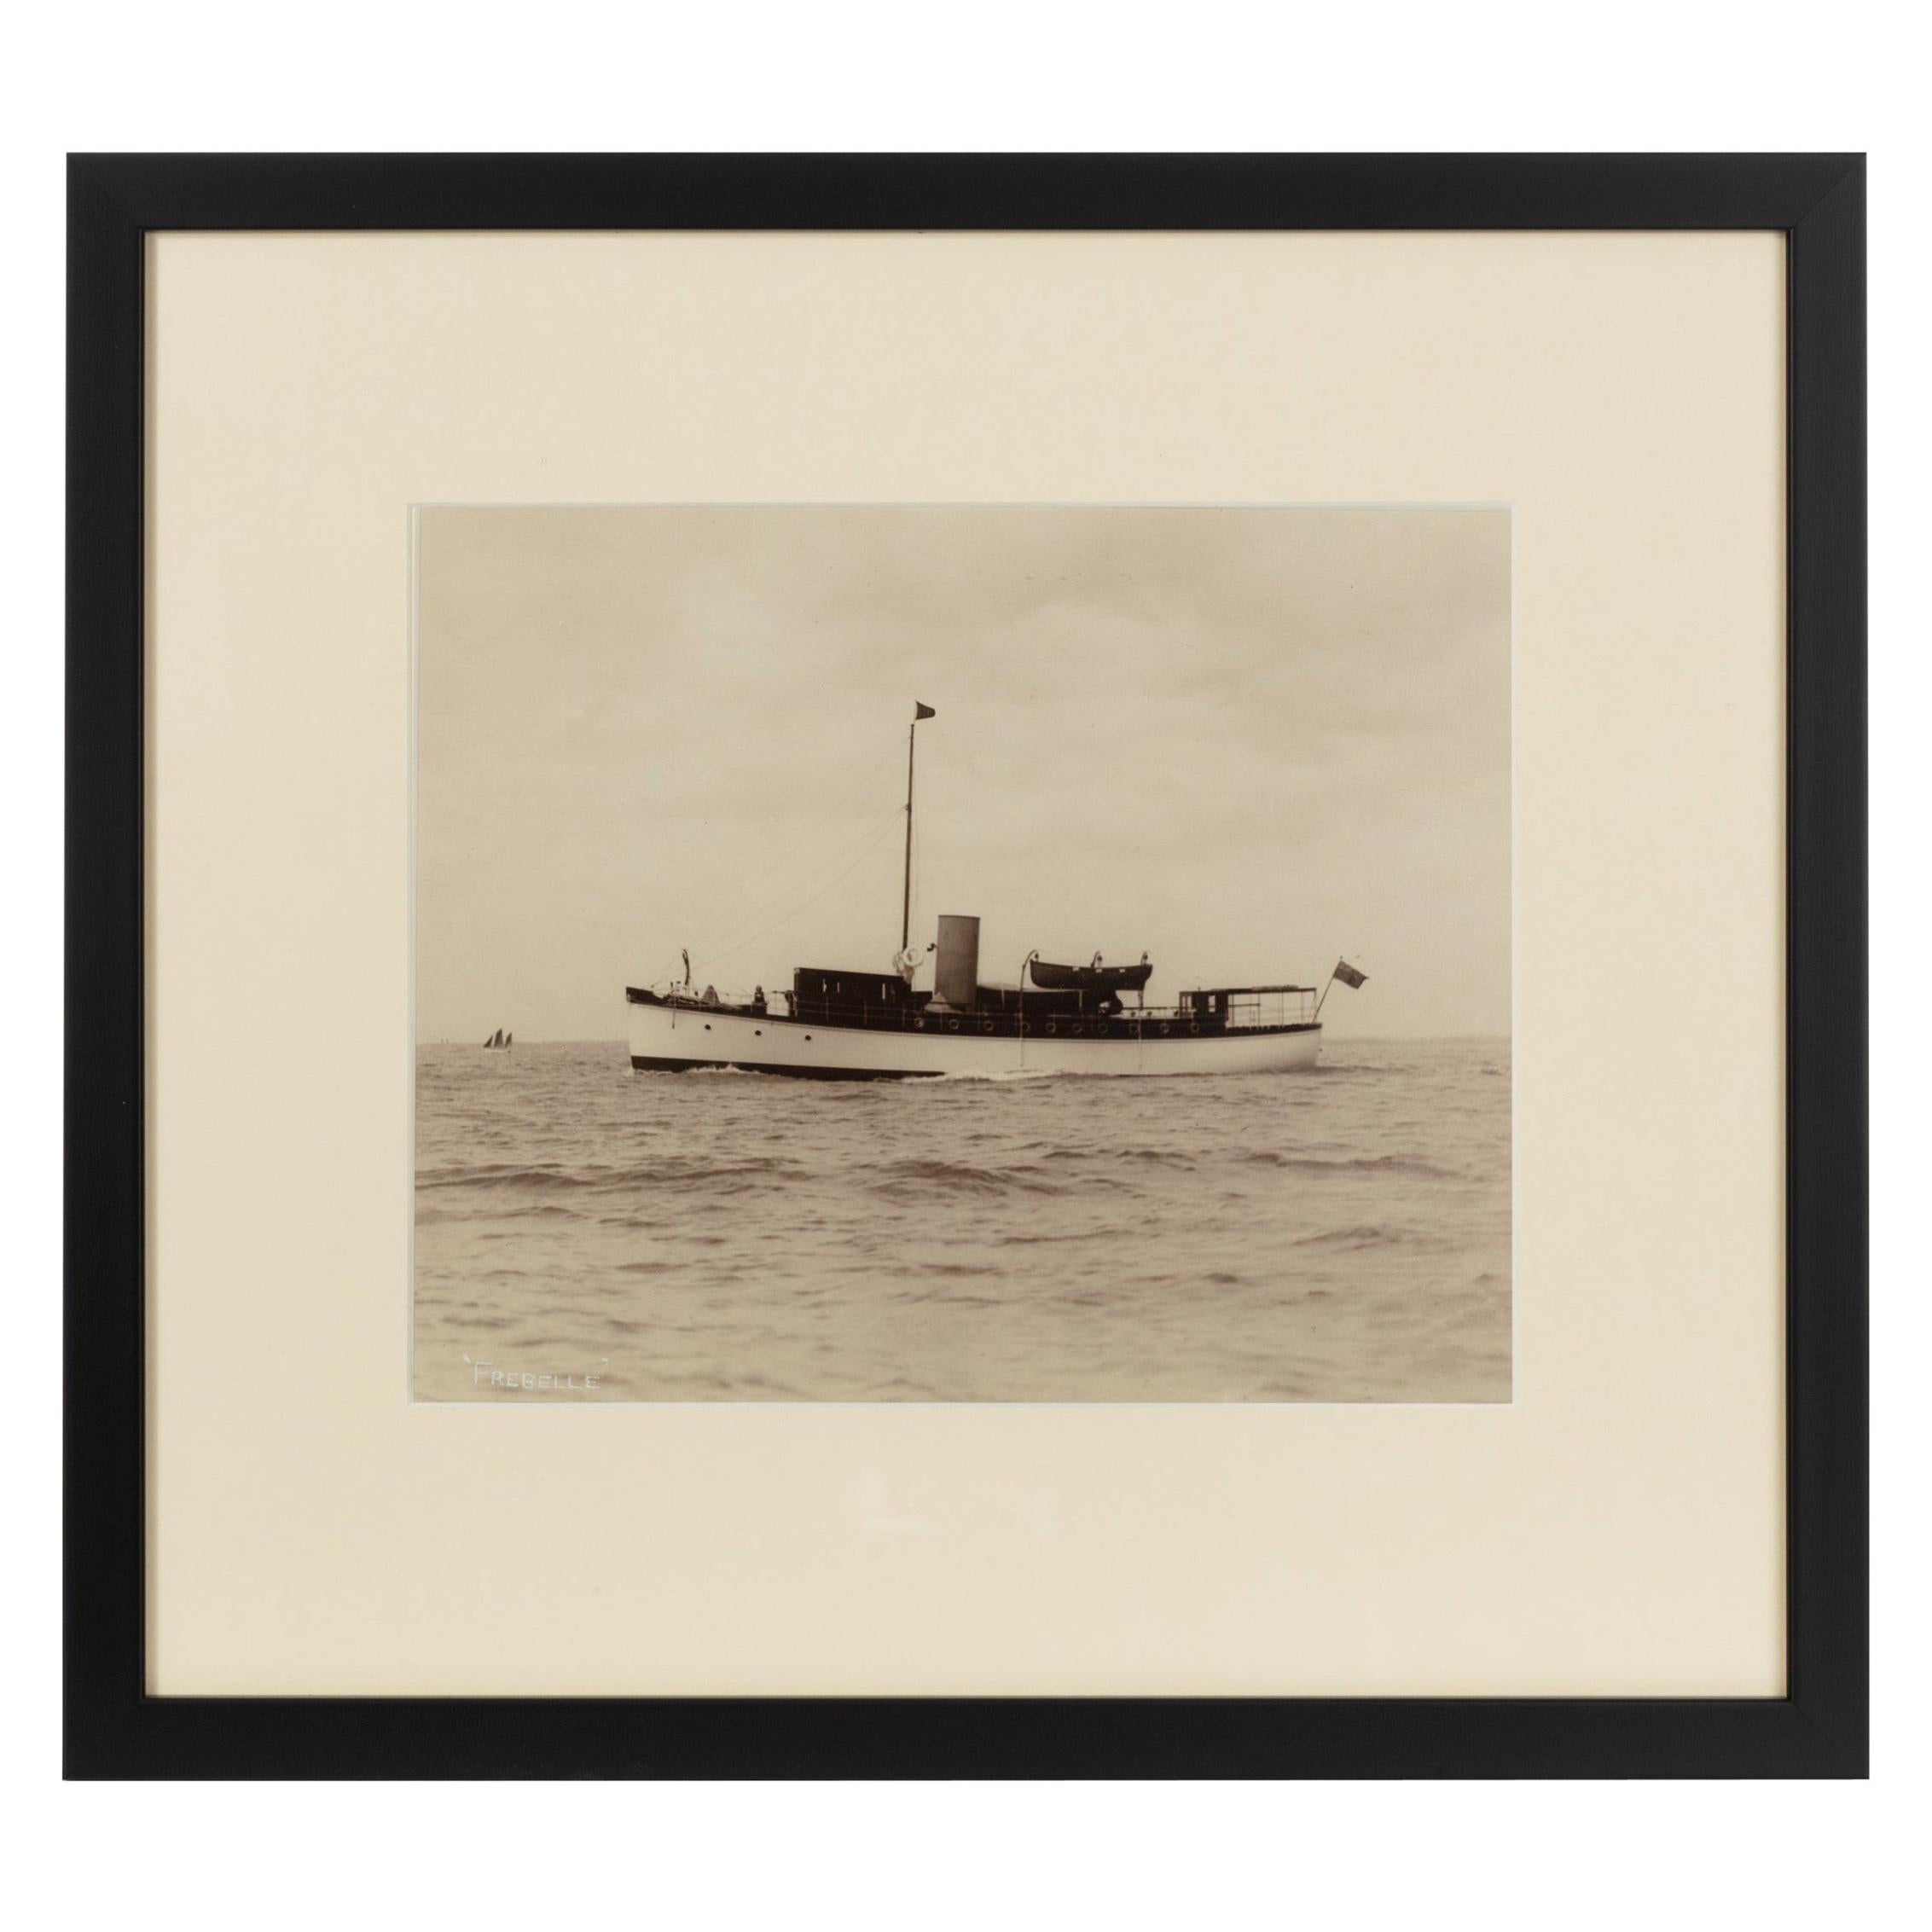 Early Silver Gelatin Photographic Print of the Gentleman’s Yacht Frebelle